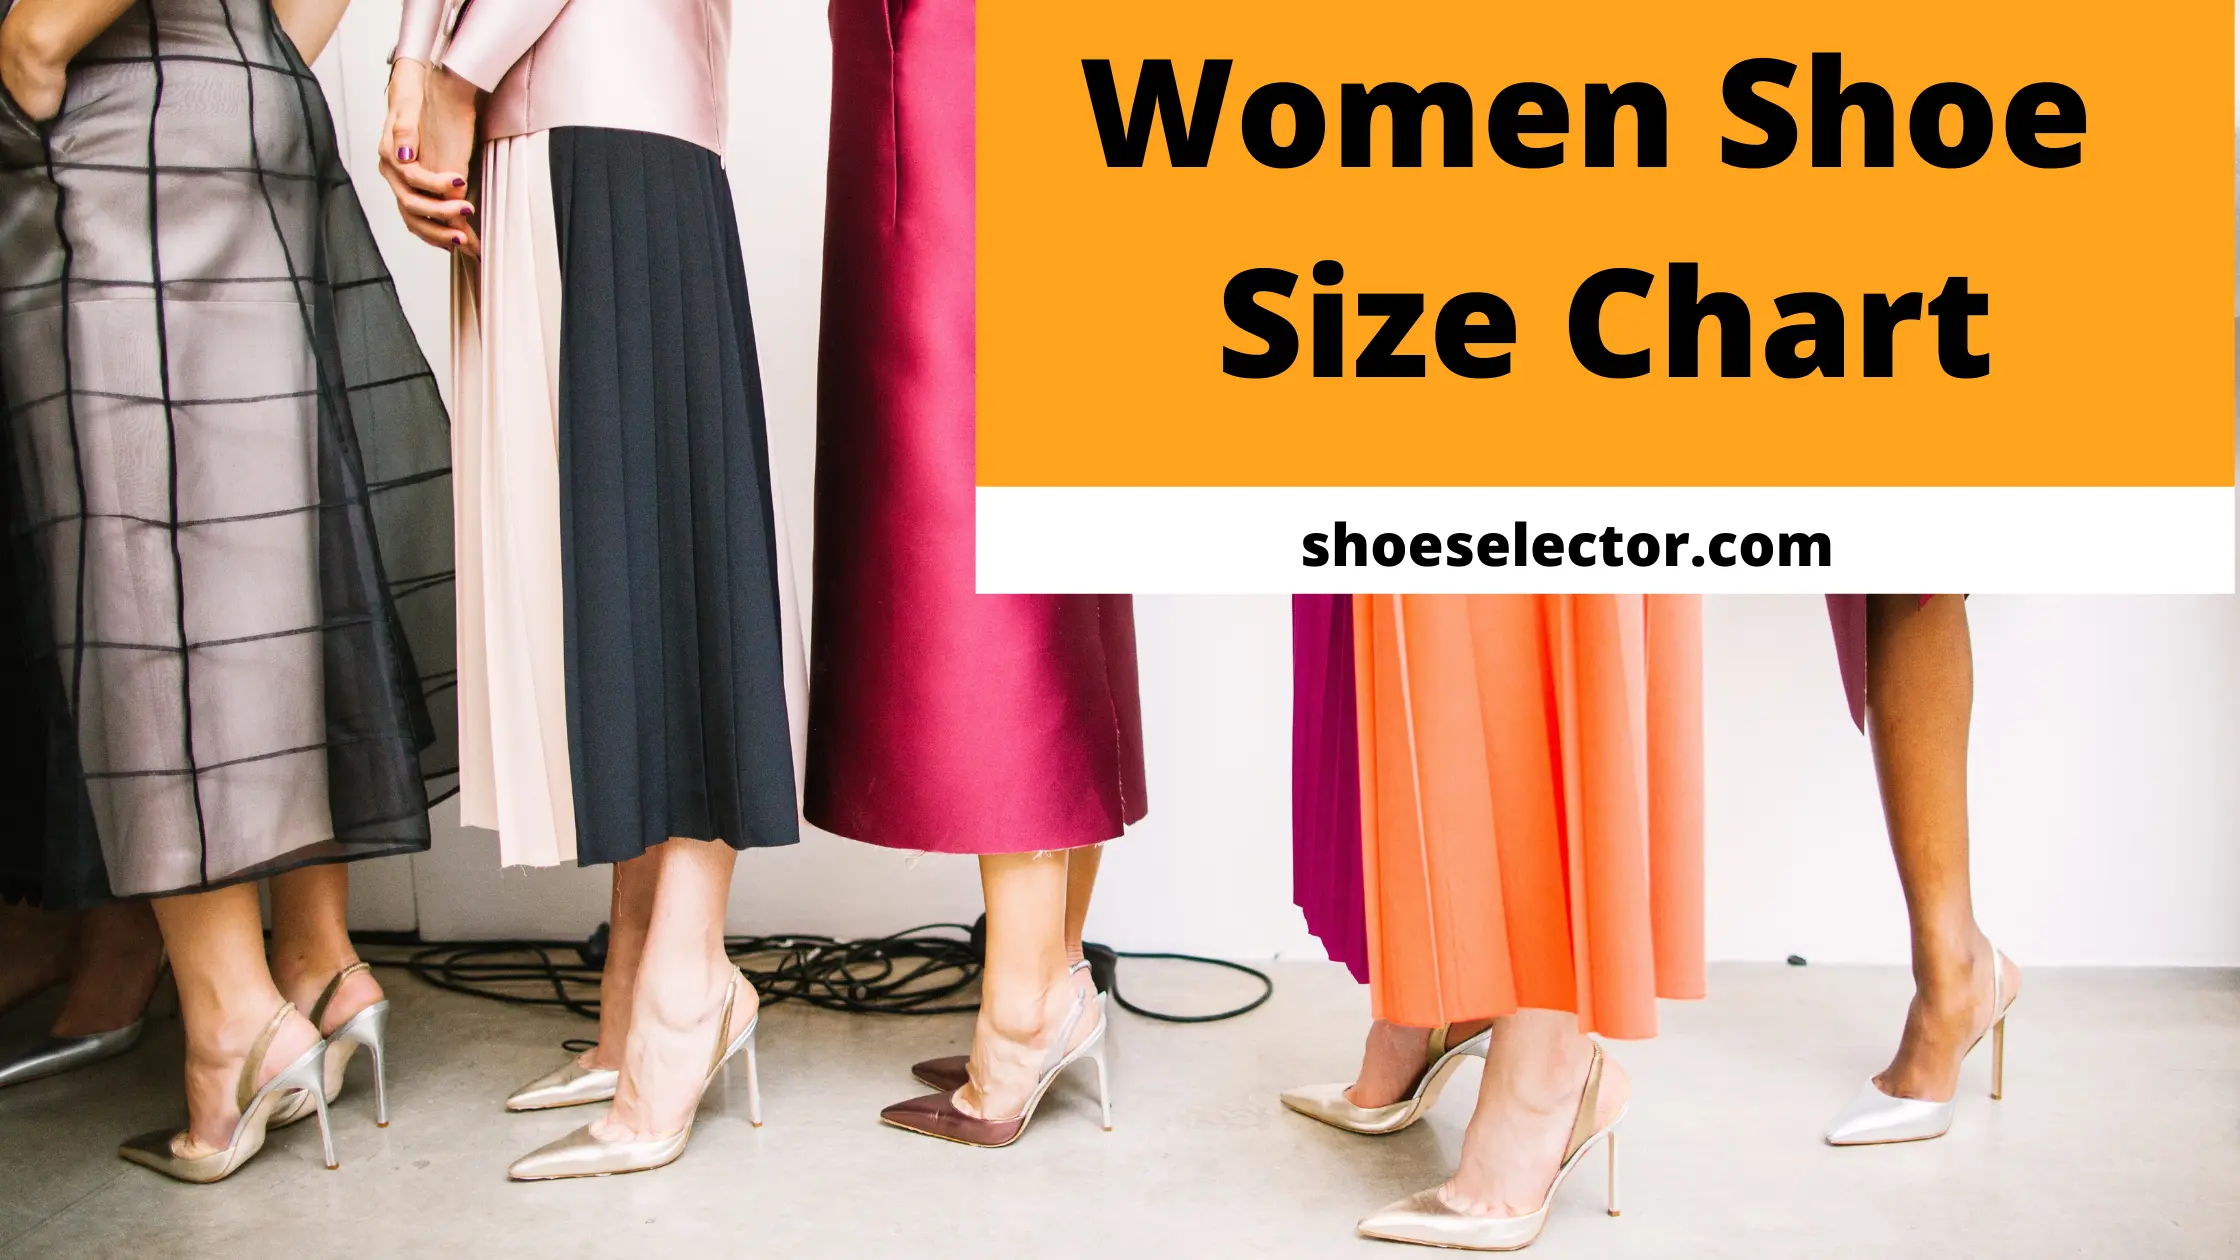 Women's Shoe Size Chart - Everything You Need To Know